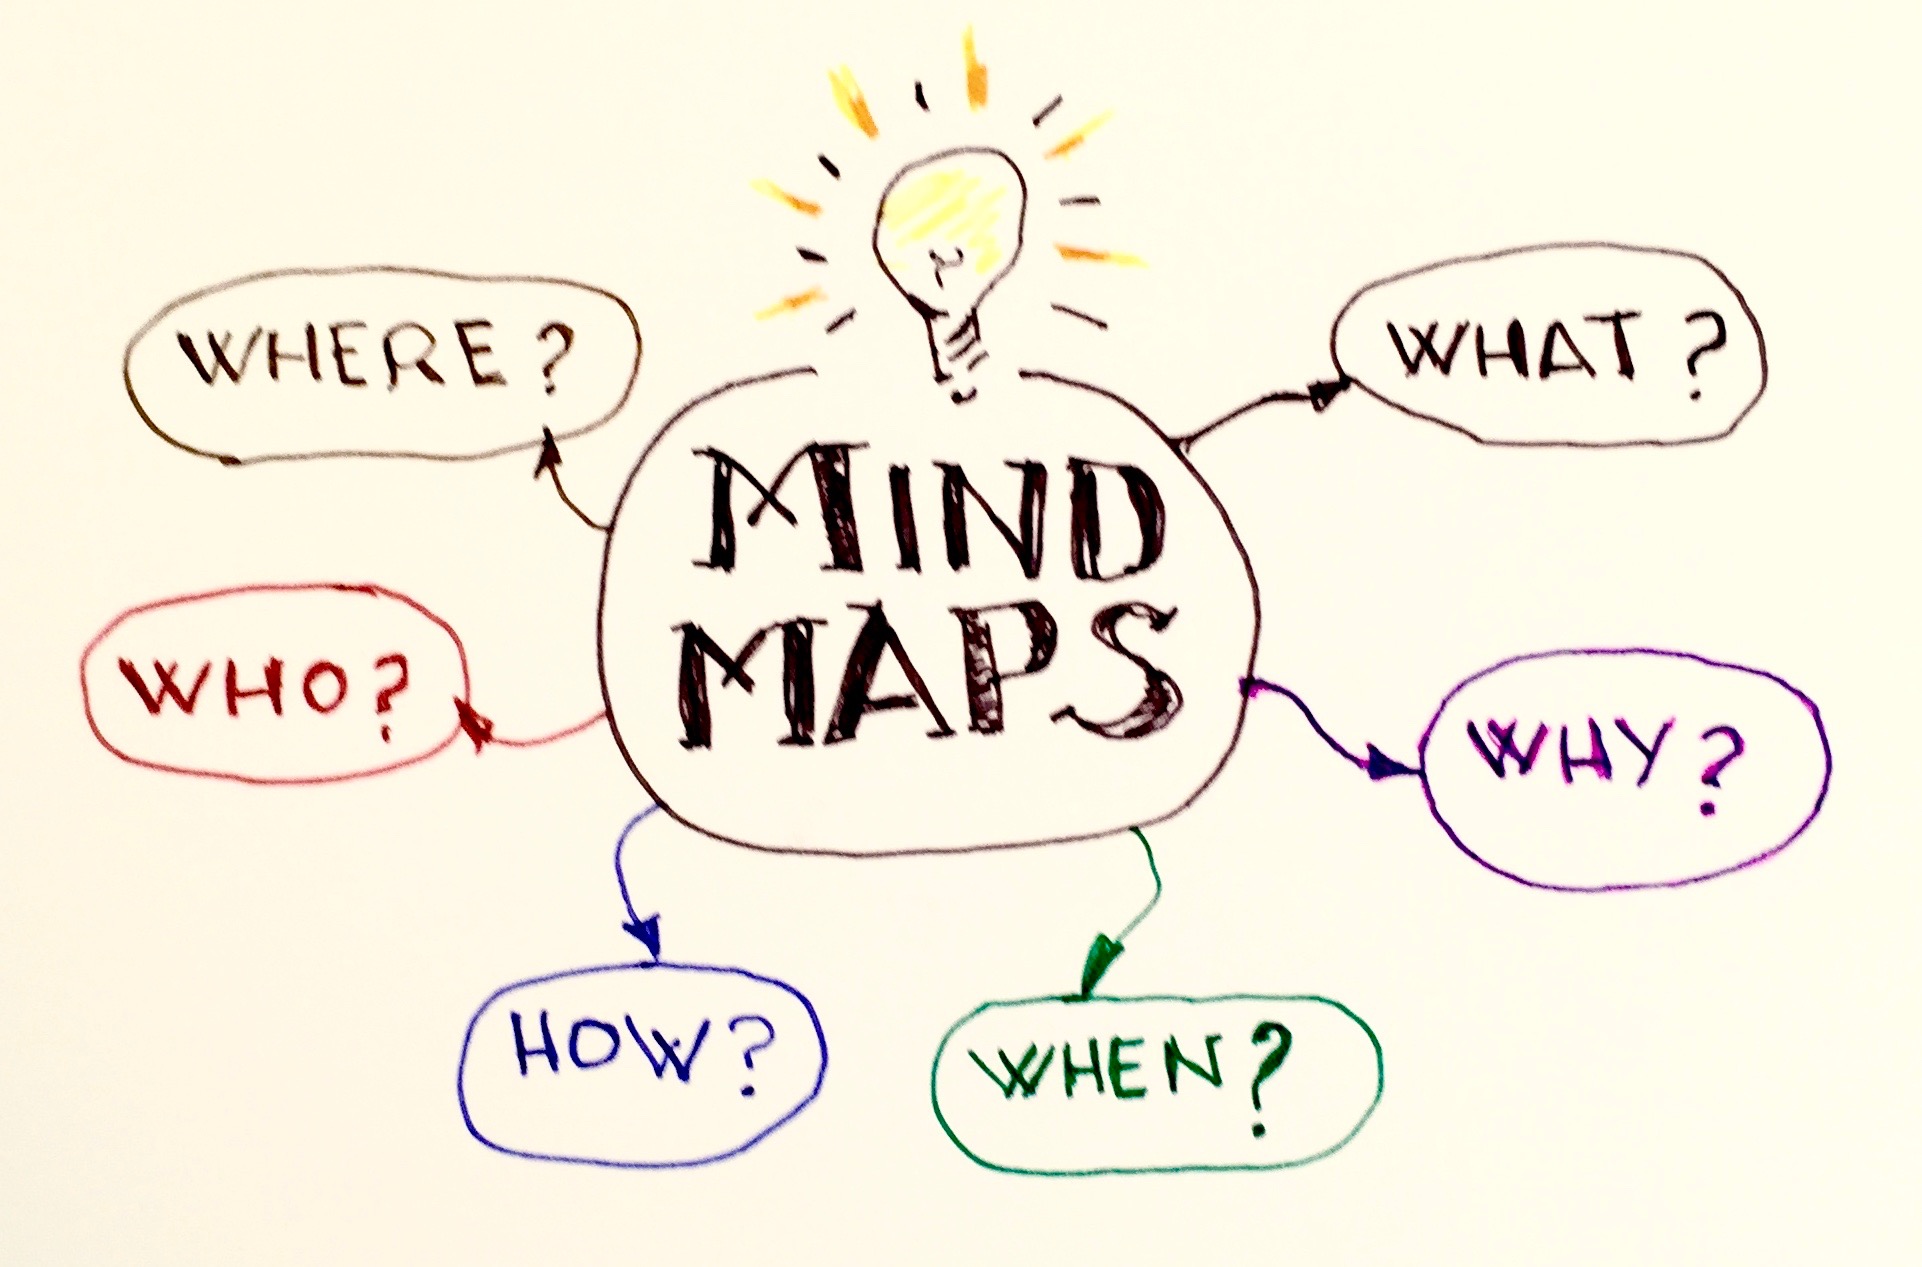 mind-maps-when-why-how-to-use-them-thunderhead-works